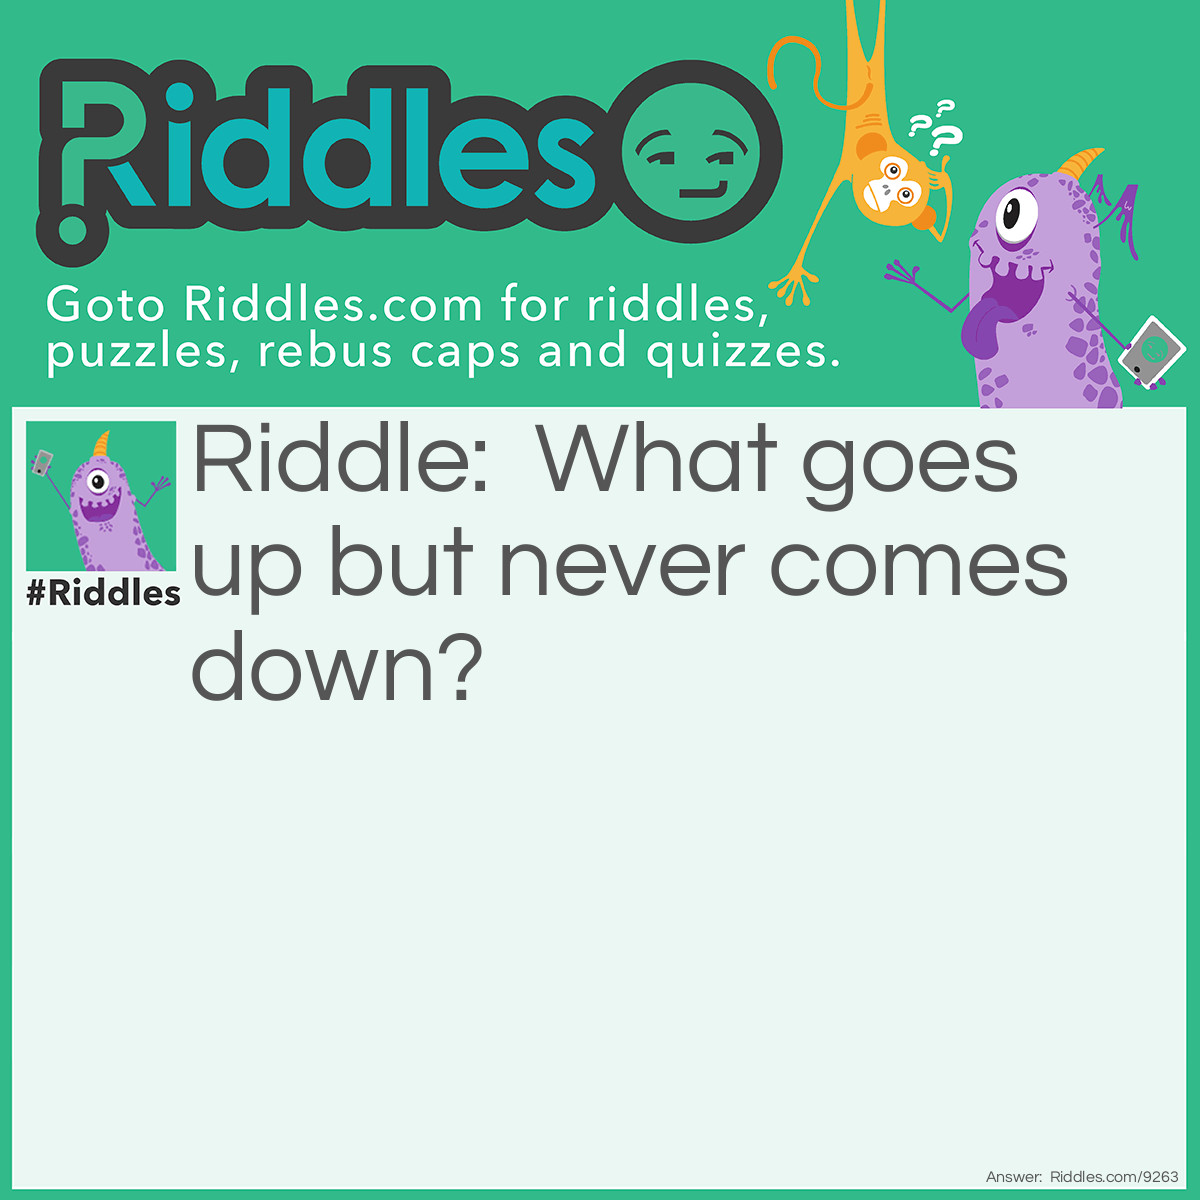 Riddle: What goes up but never comes down? Answer: Age!